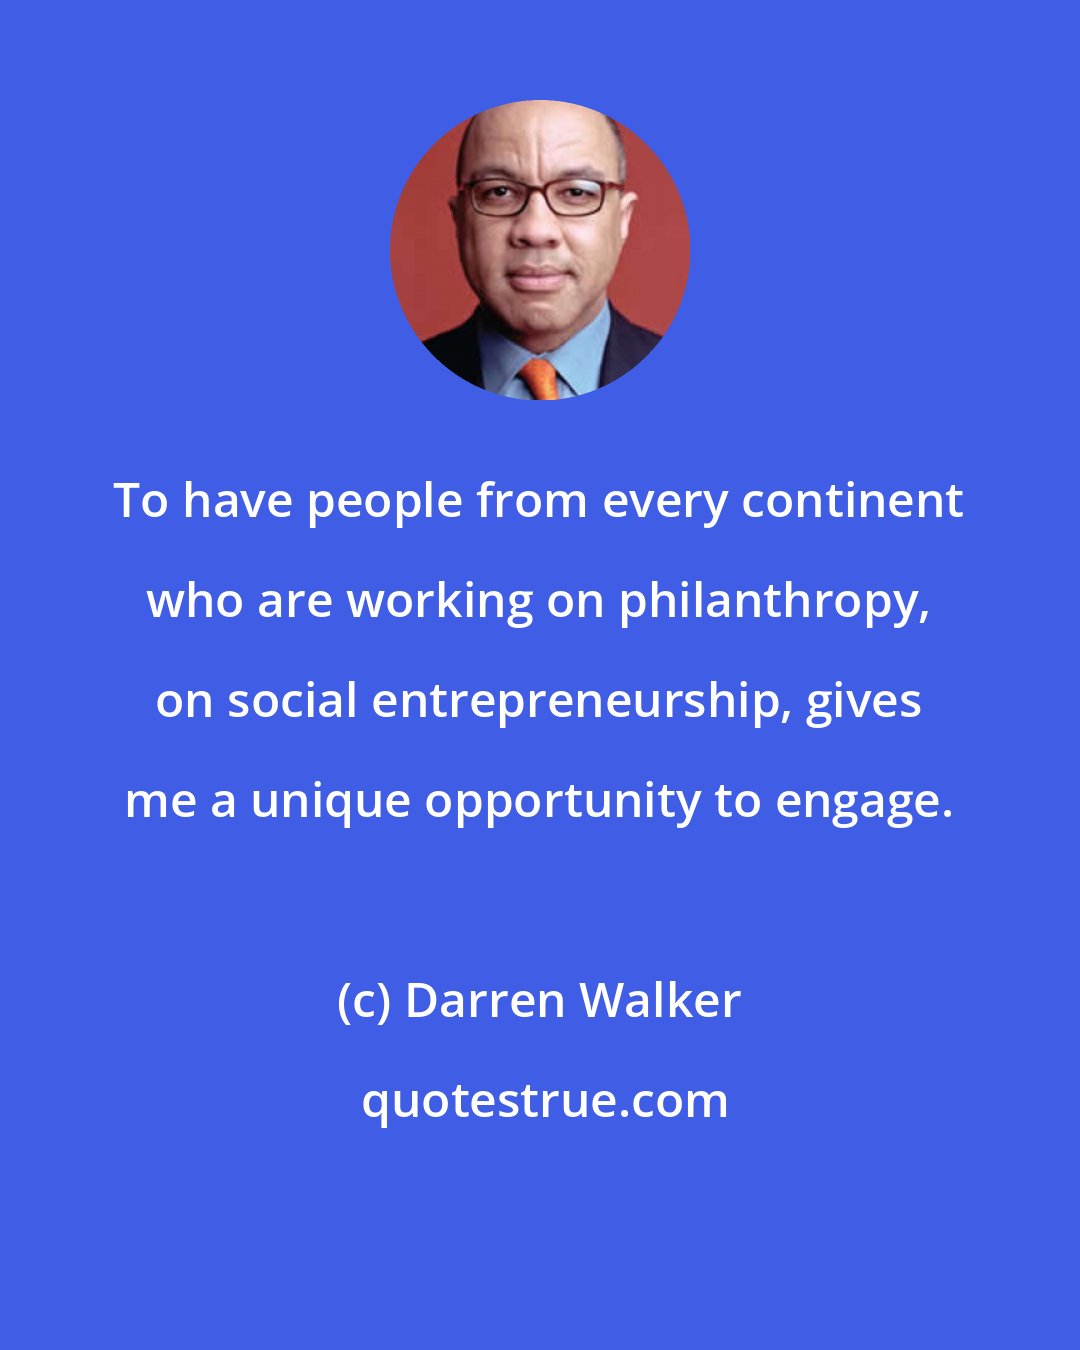 Darren Walker: To have people from every continent who are working on philanthropy, on social entrepreneurship, gives me a unique opportunity to engage.